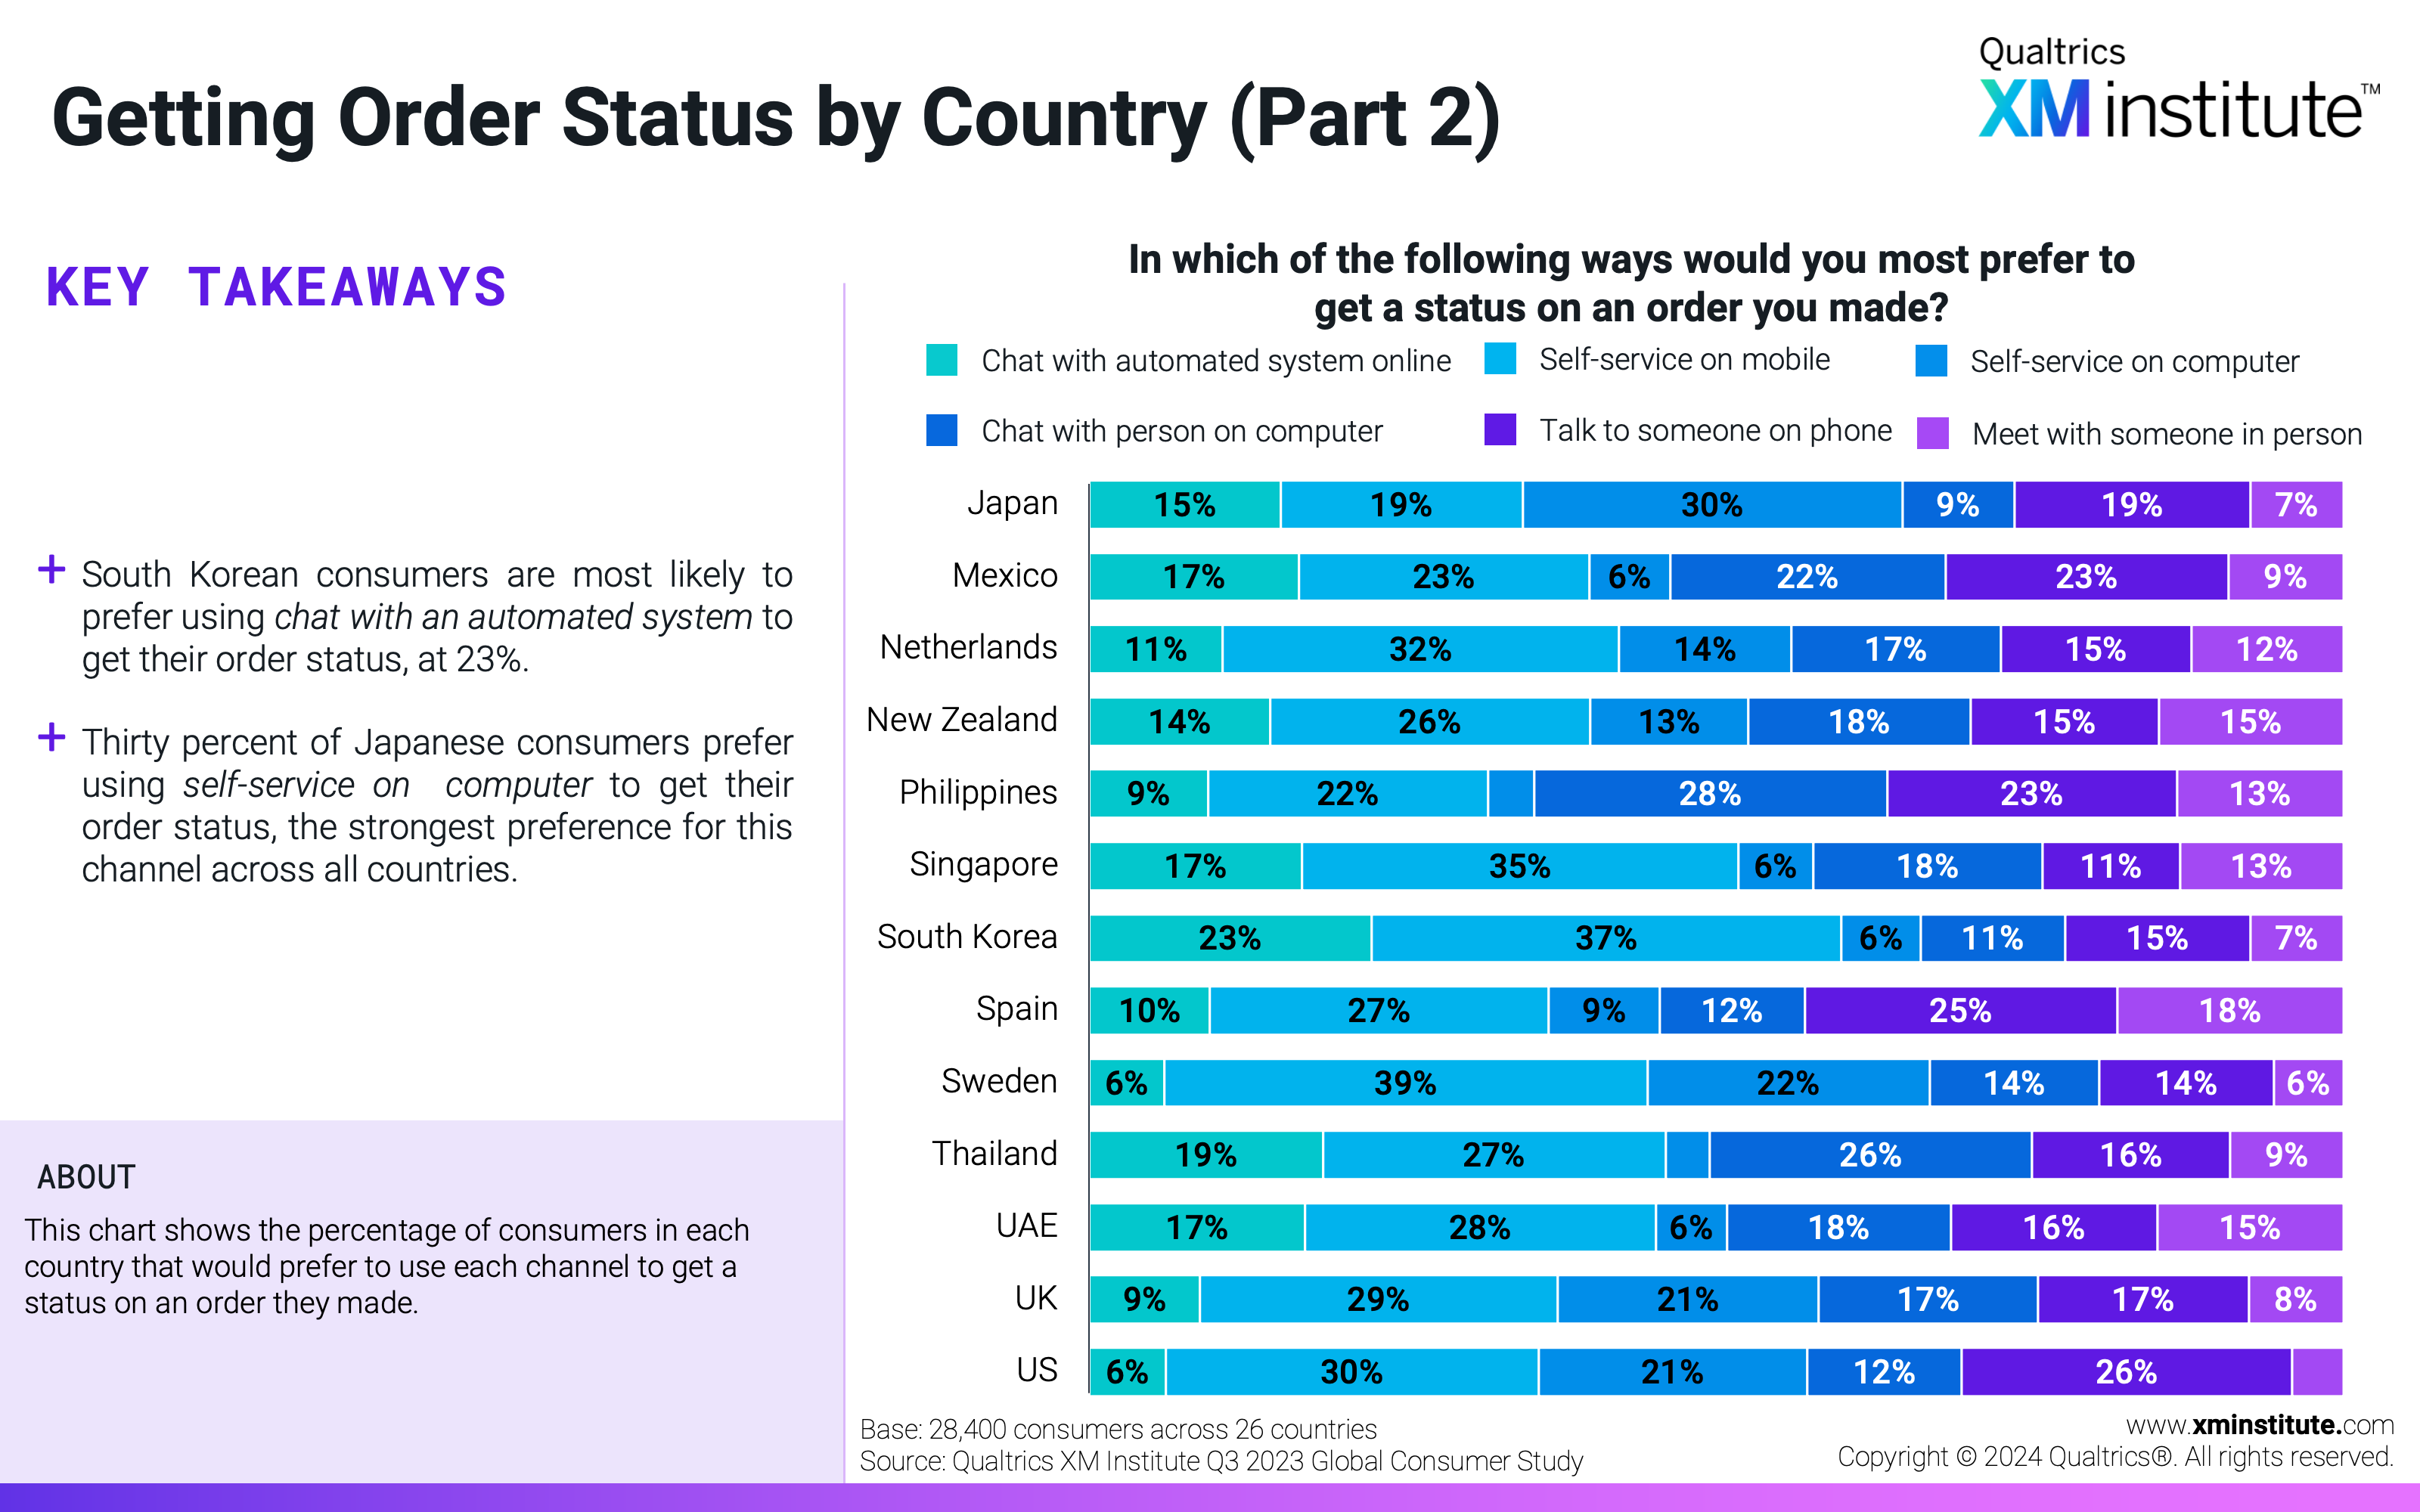 This chart shows the percentage of consumers in each country that would prefer to use each channel to get a status on an order they made. 